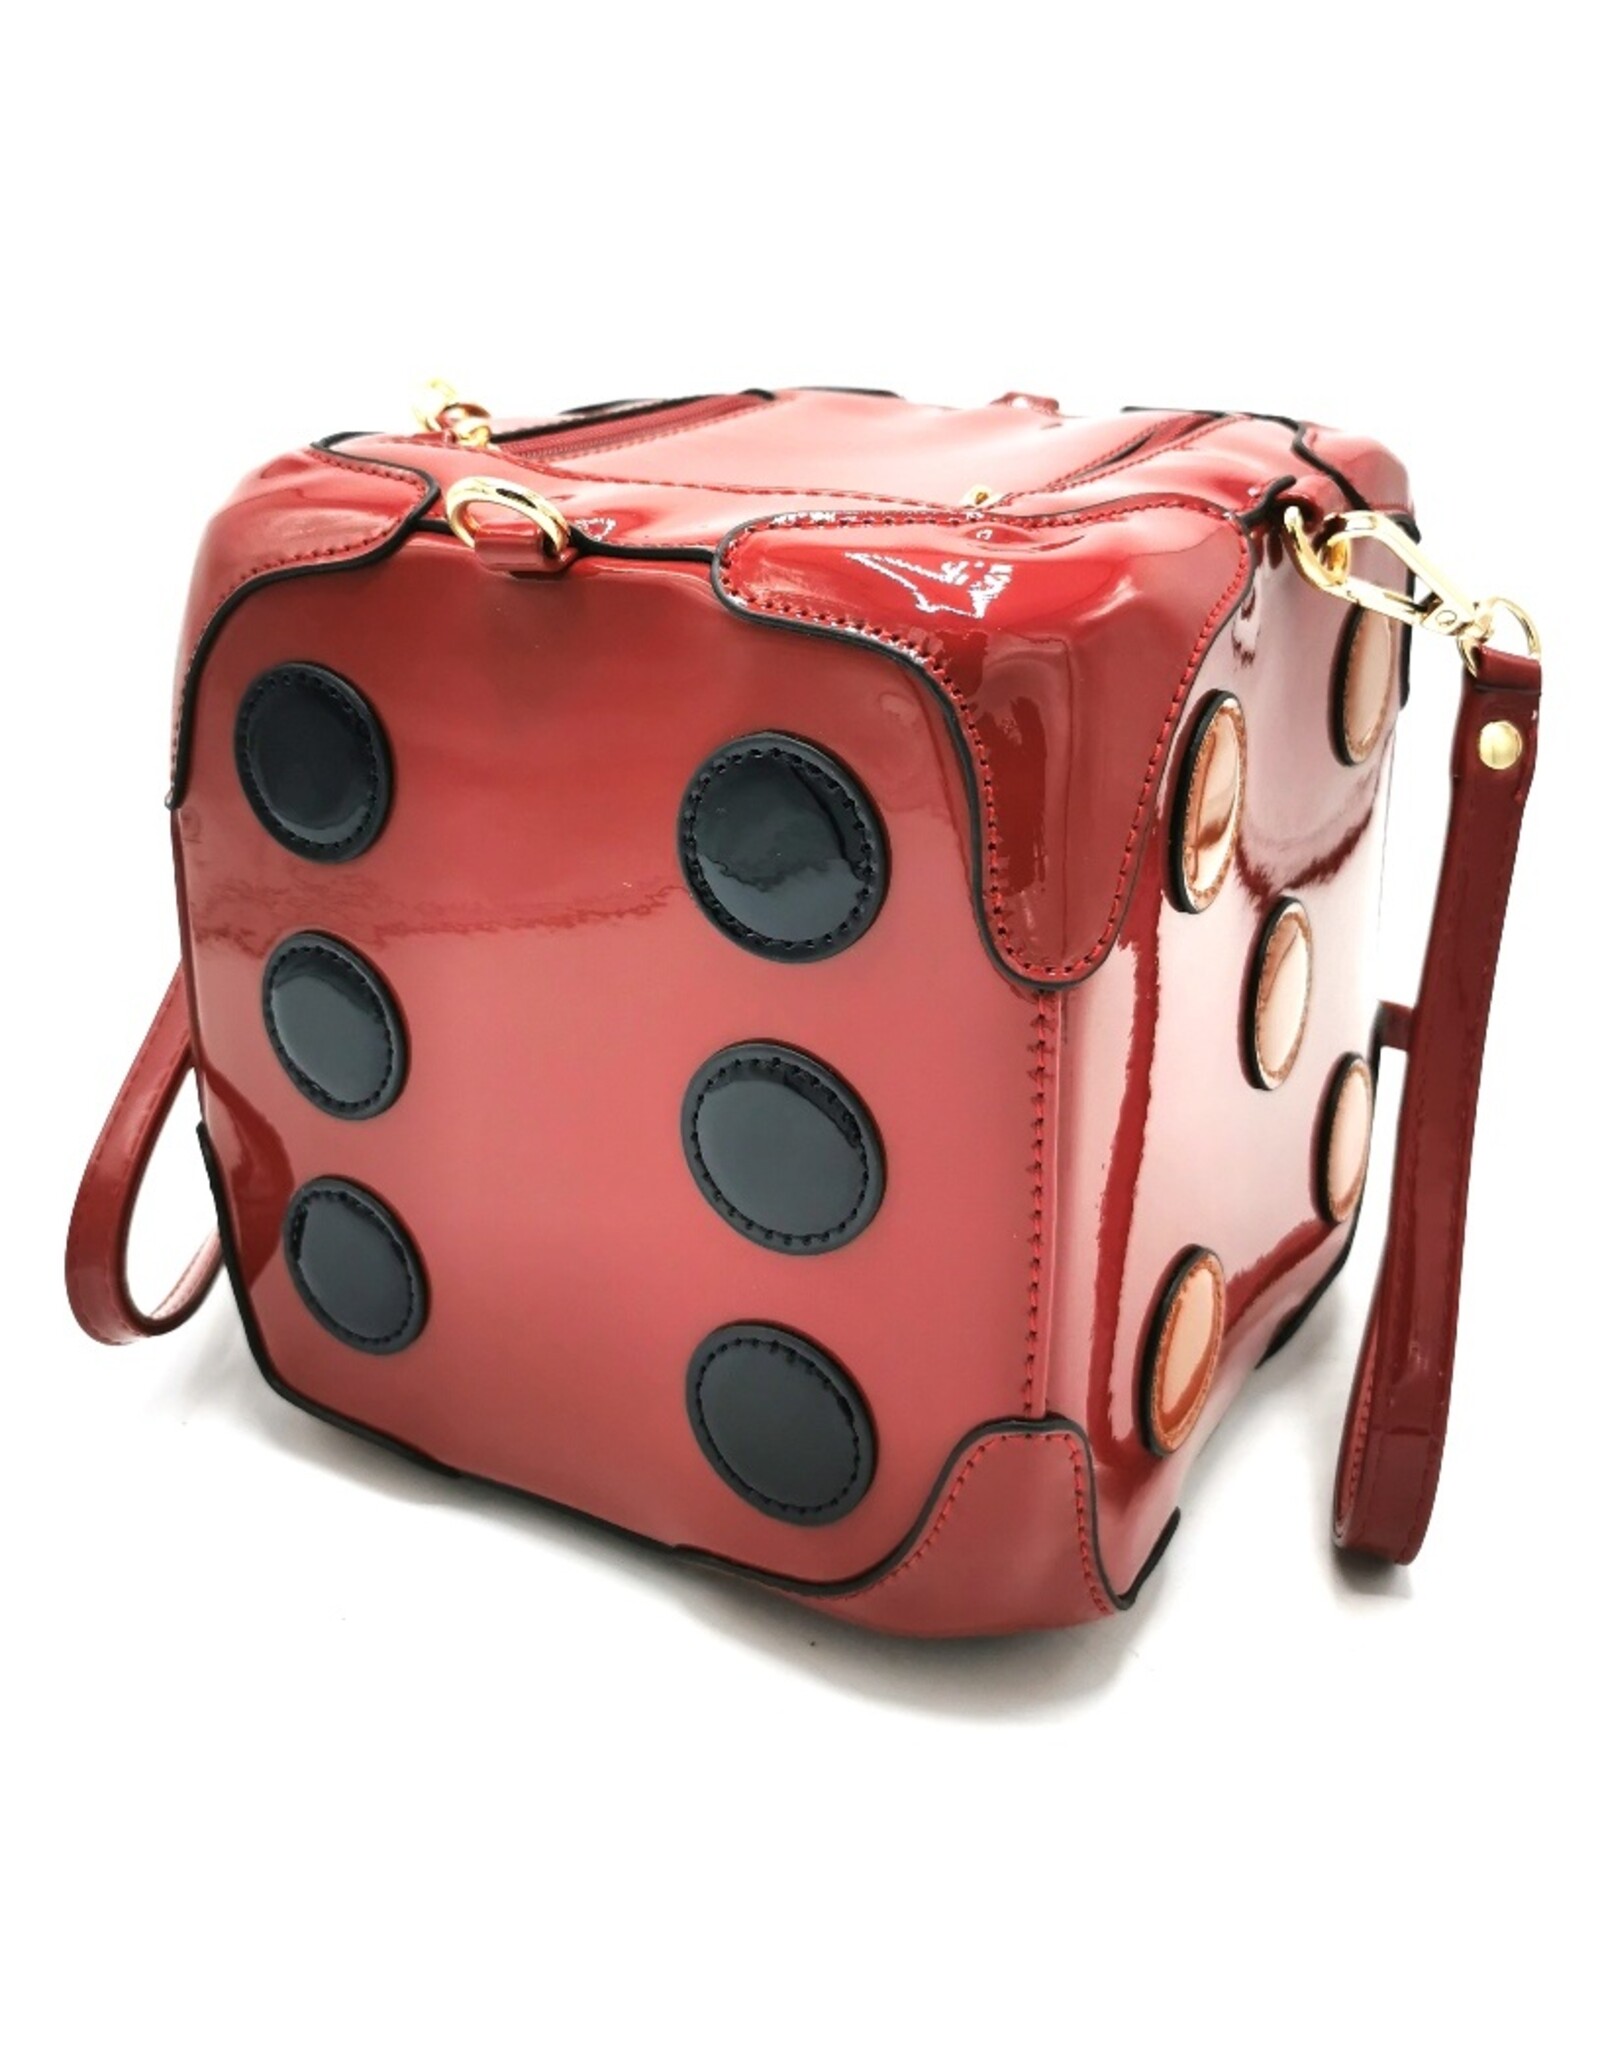 Systyle Fantasy bags - Fantasy bag Dice Red